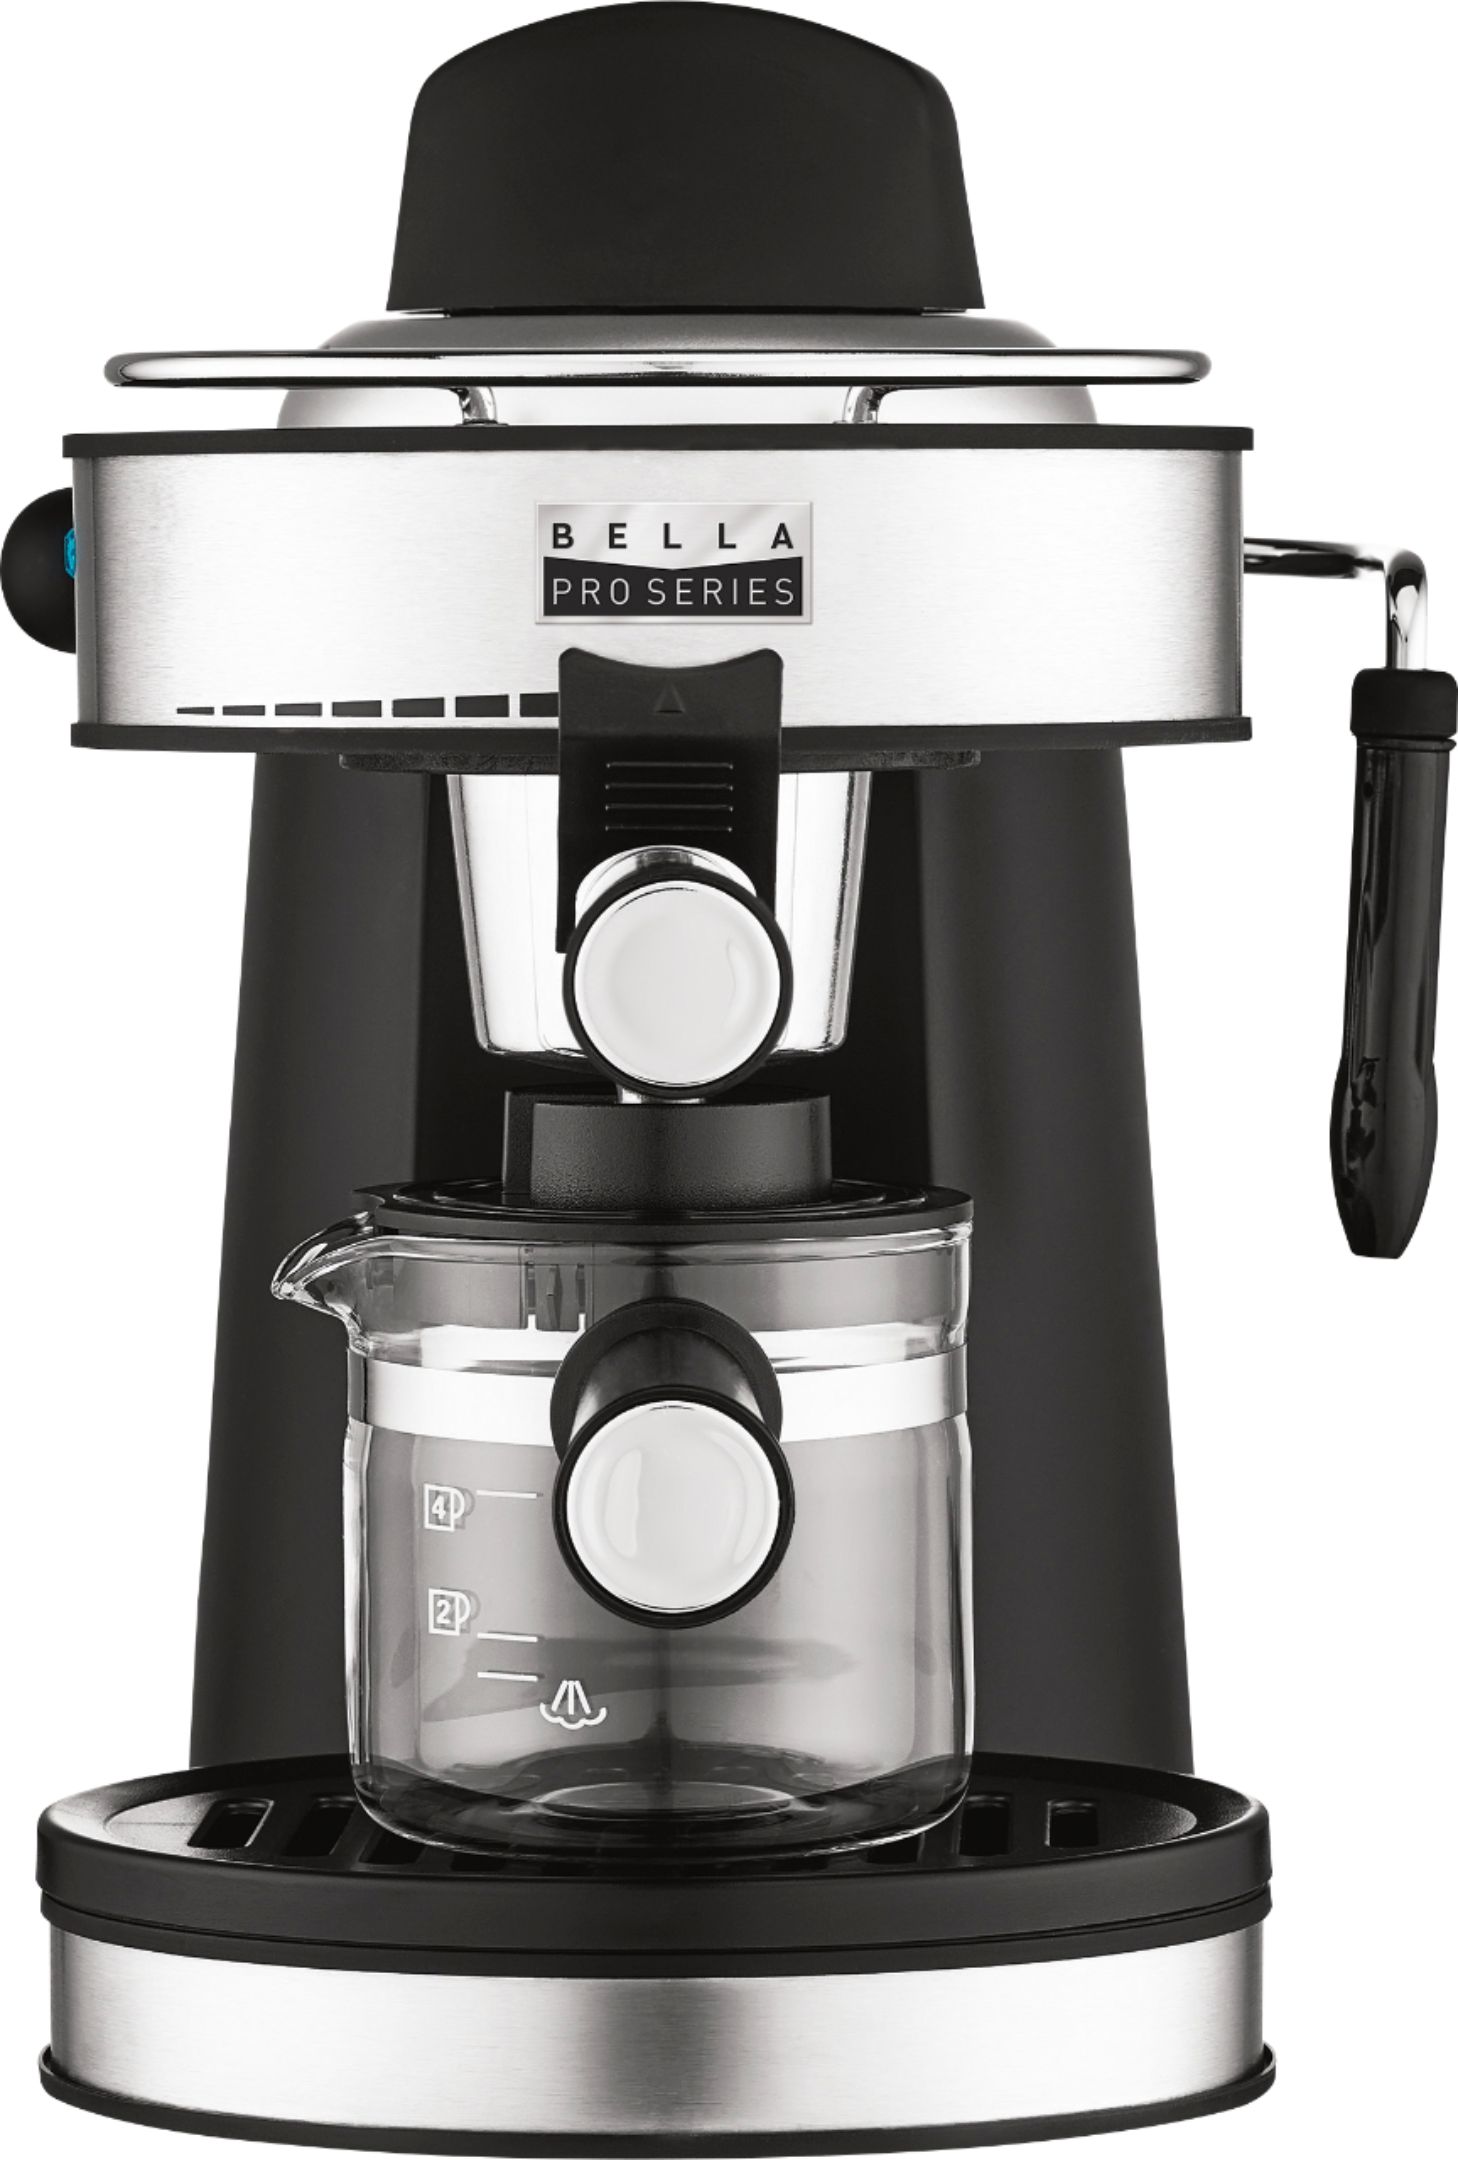 Bella Pro Series – Pro Series Espresso Machine with 5 bars of pressure and Milk Frother – Just $34.99 at Best Buy